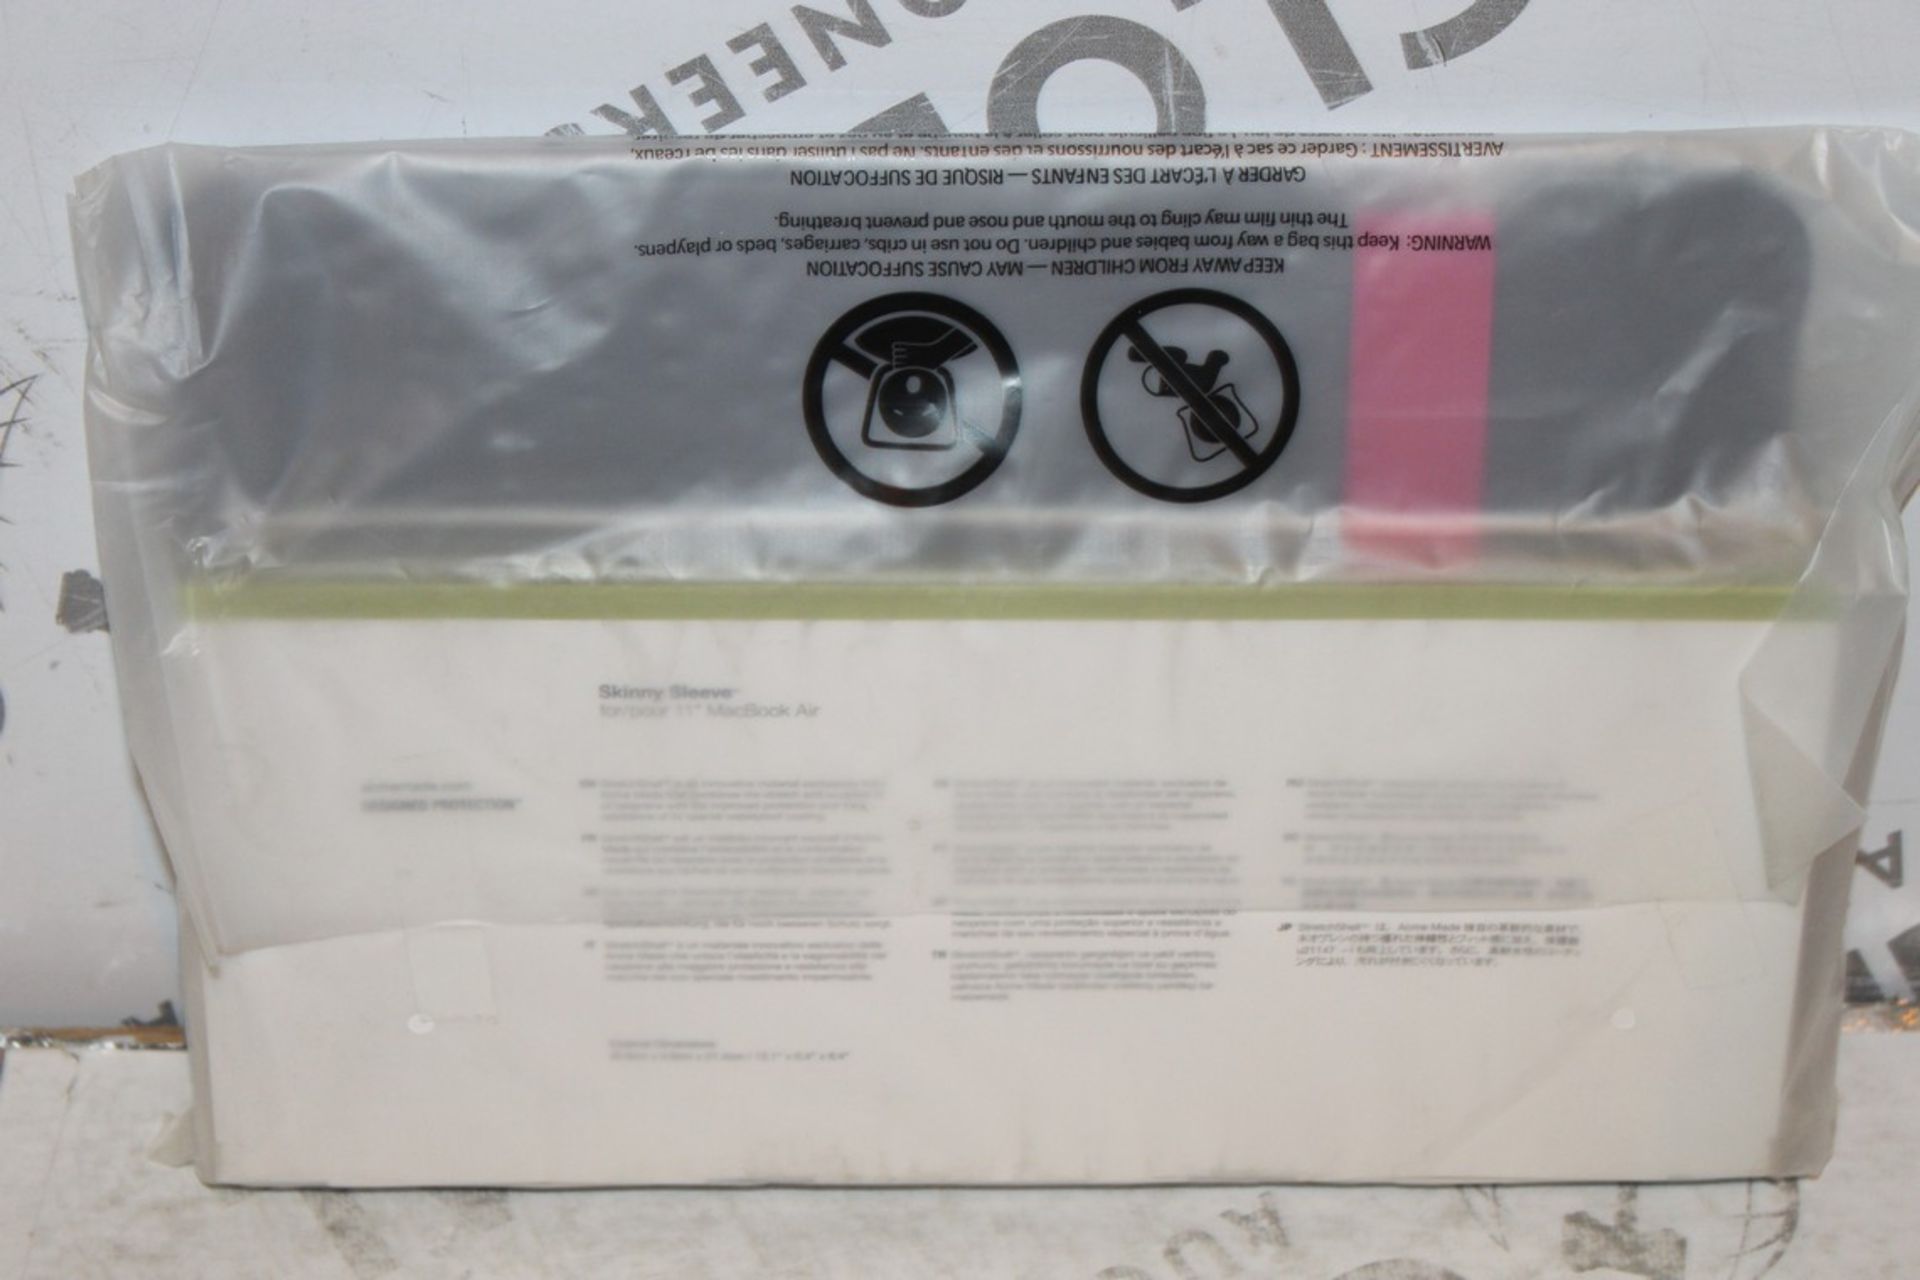 Lot to Contain 5 Brand New Grey & Pink Acmi Made Skinny Sleeve for 11" MacBook RRP £100